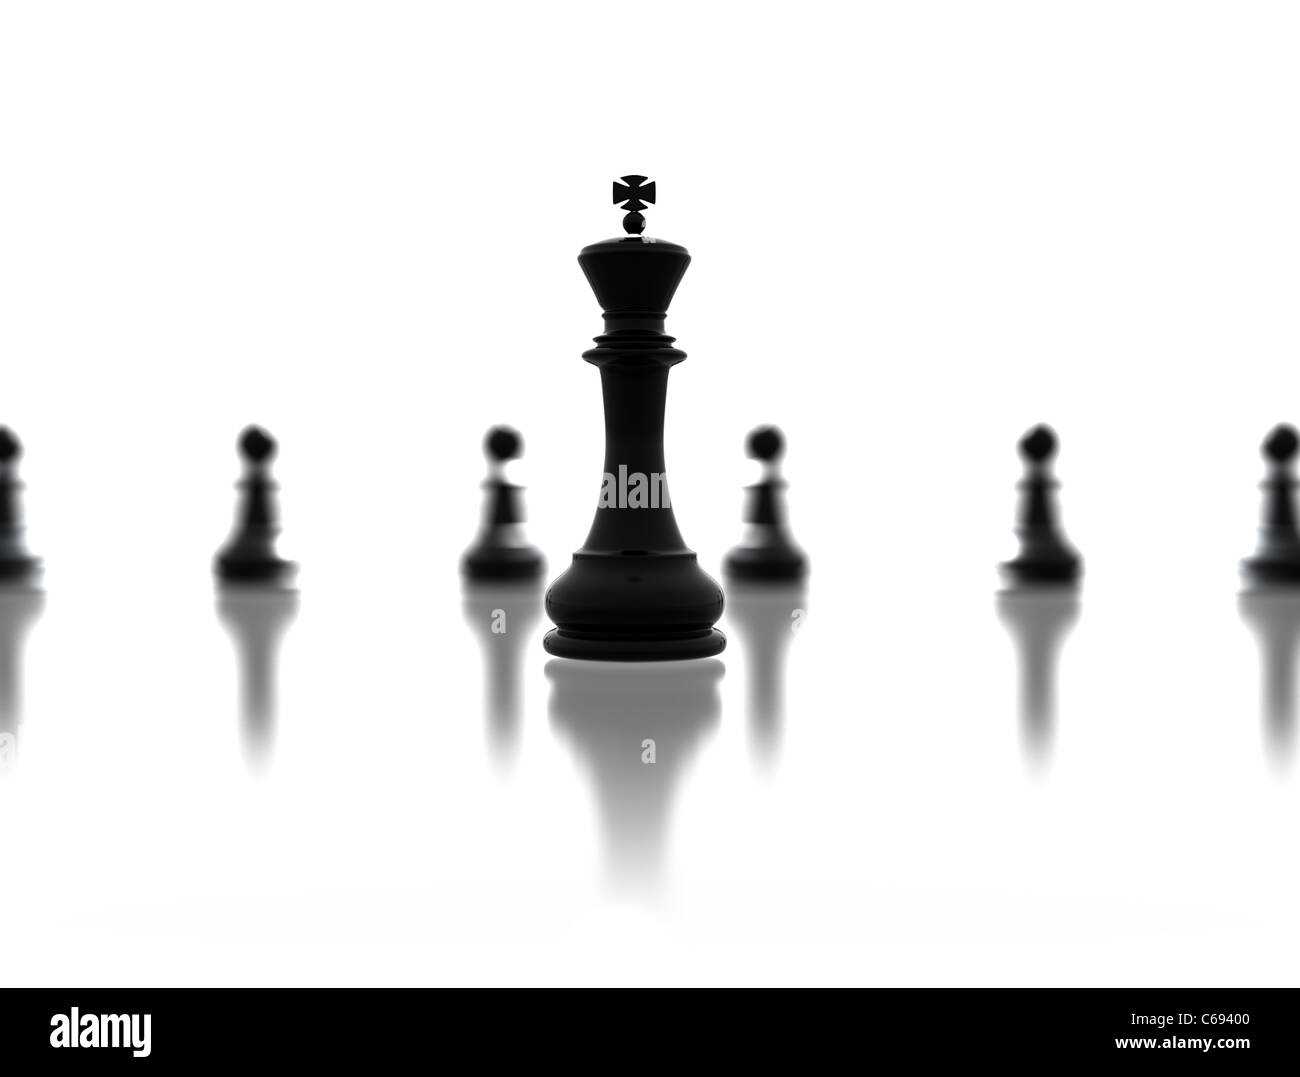 Leadership concept chess pieces Stock Photo